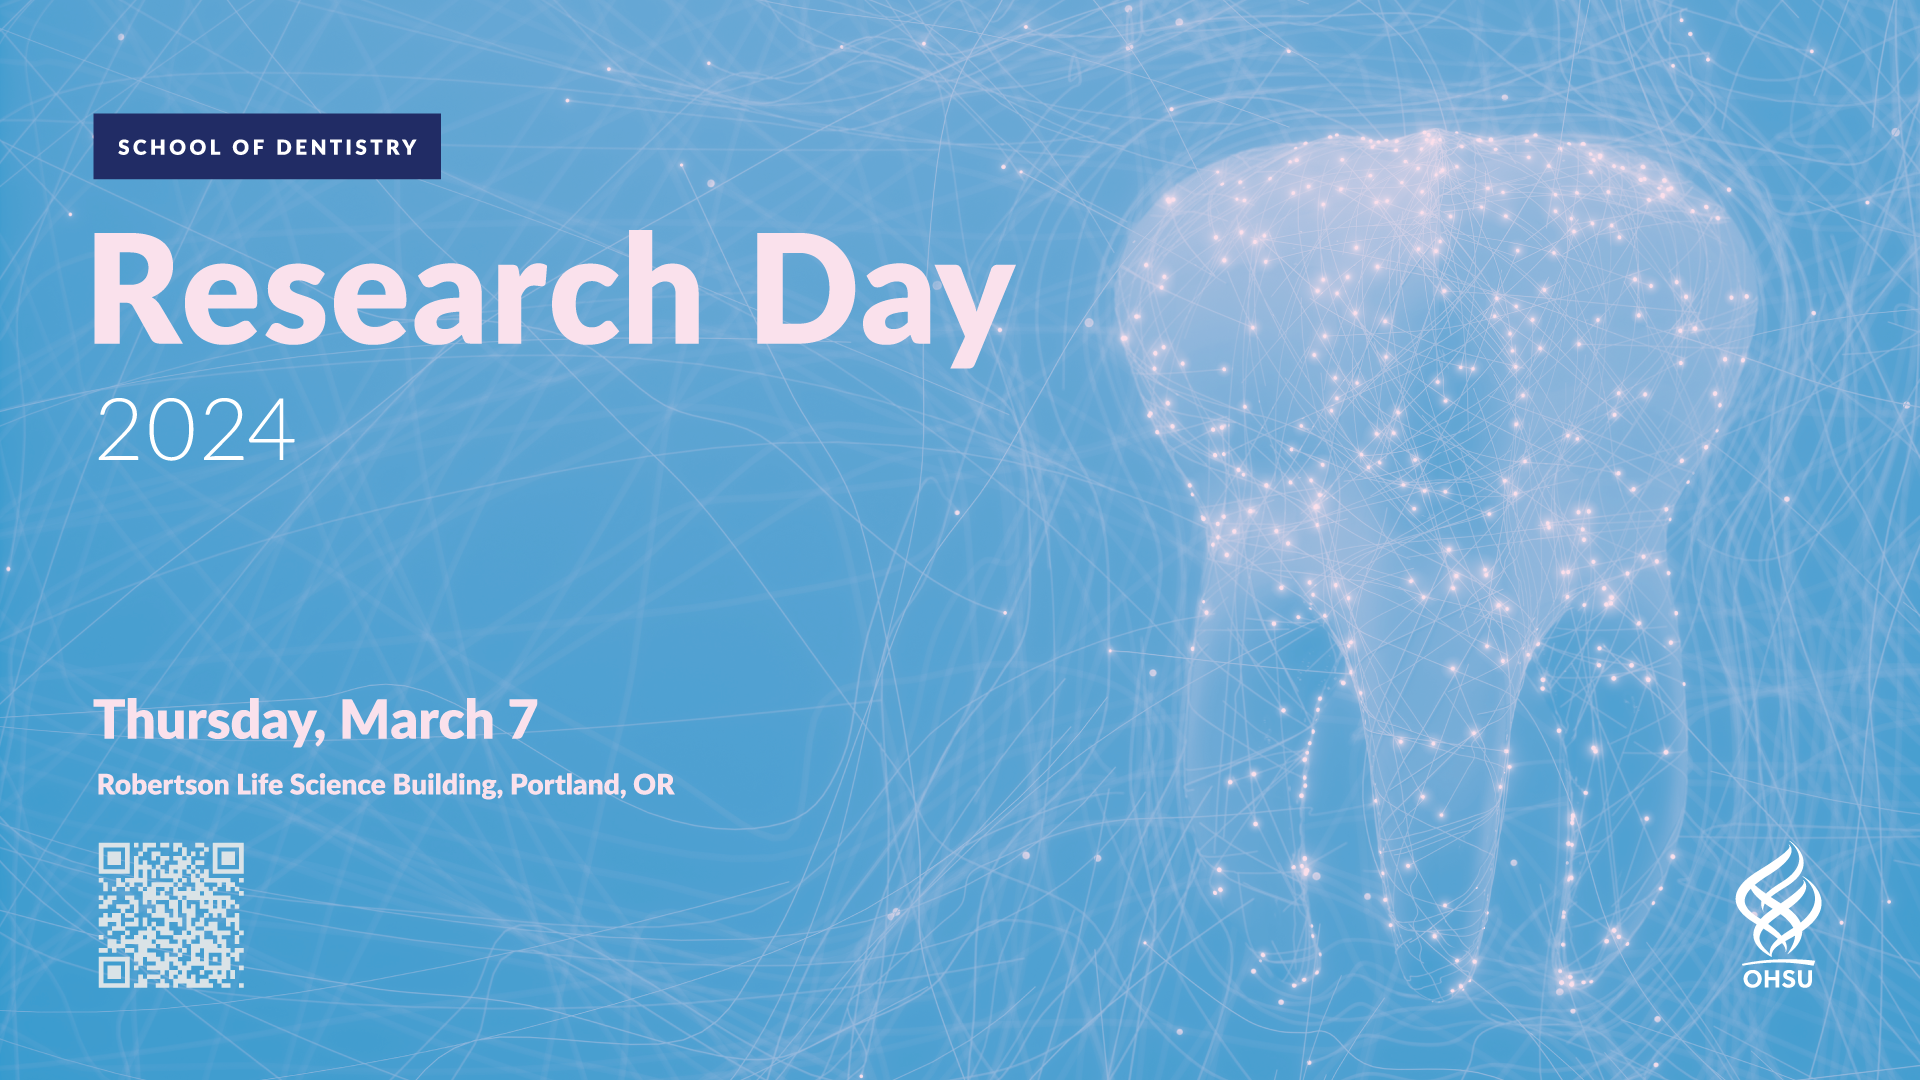 School of Dentistry Research Day announcement with a tooth made up of white dots and lines on a sky blue background.